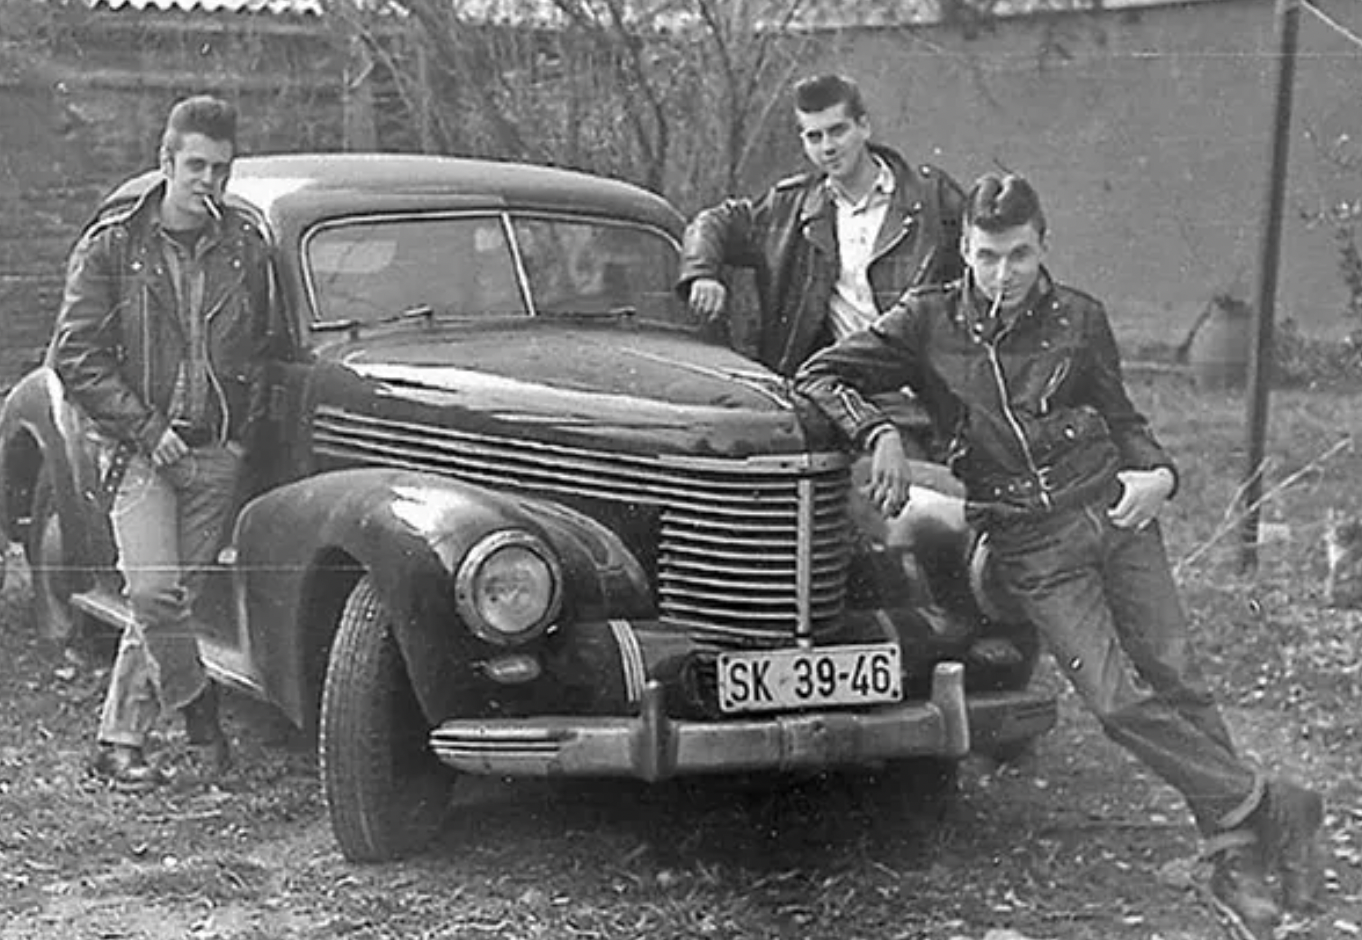 1940s greaser - Sk 3946